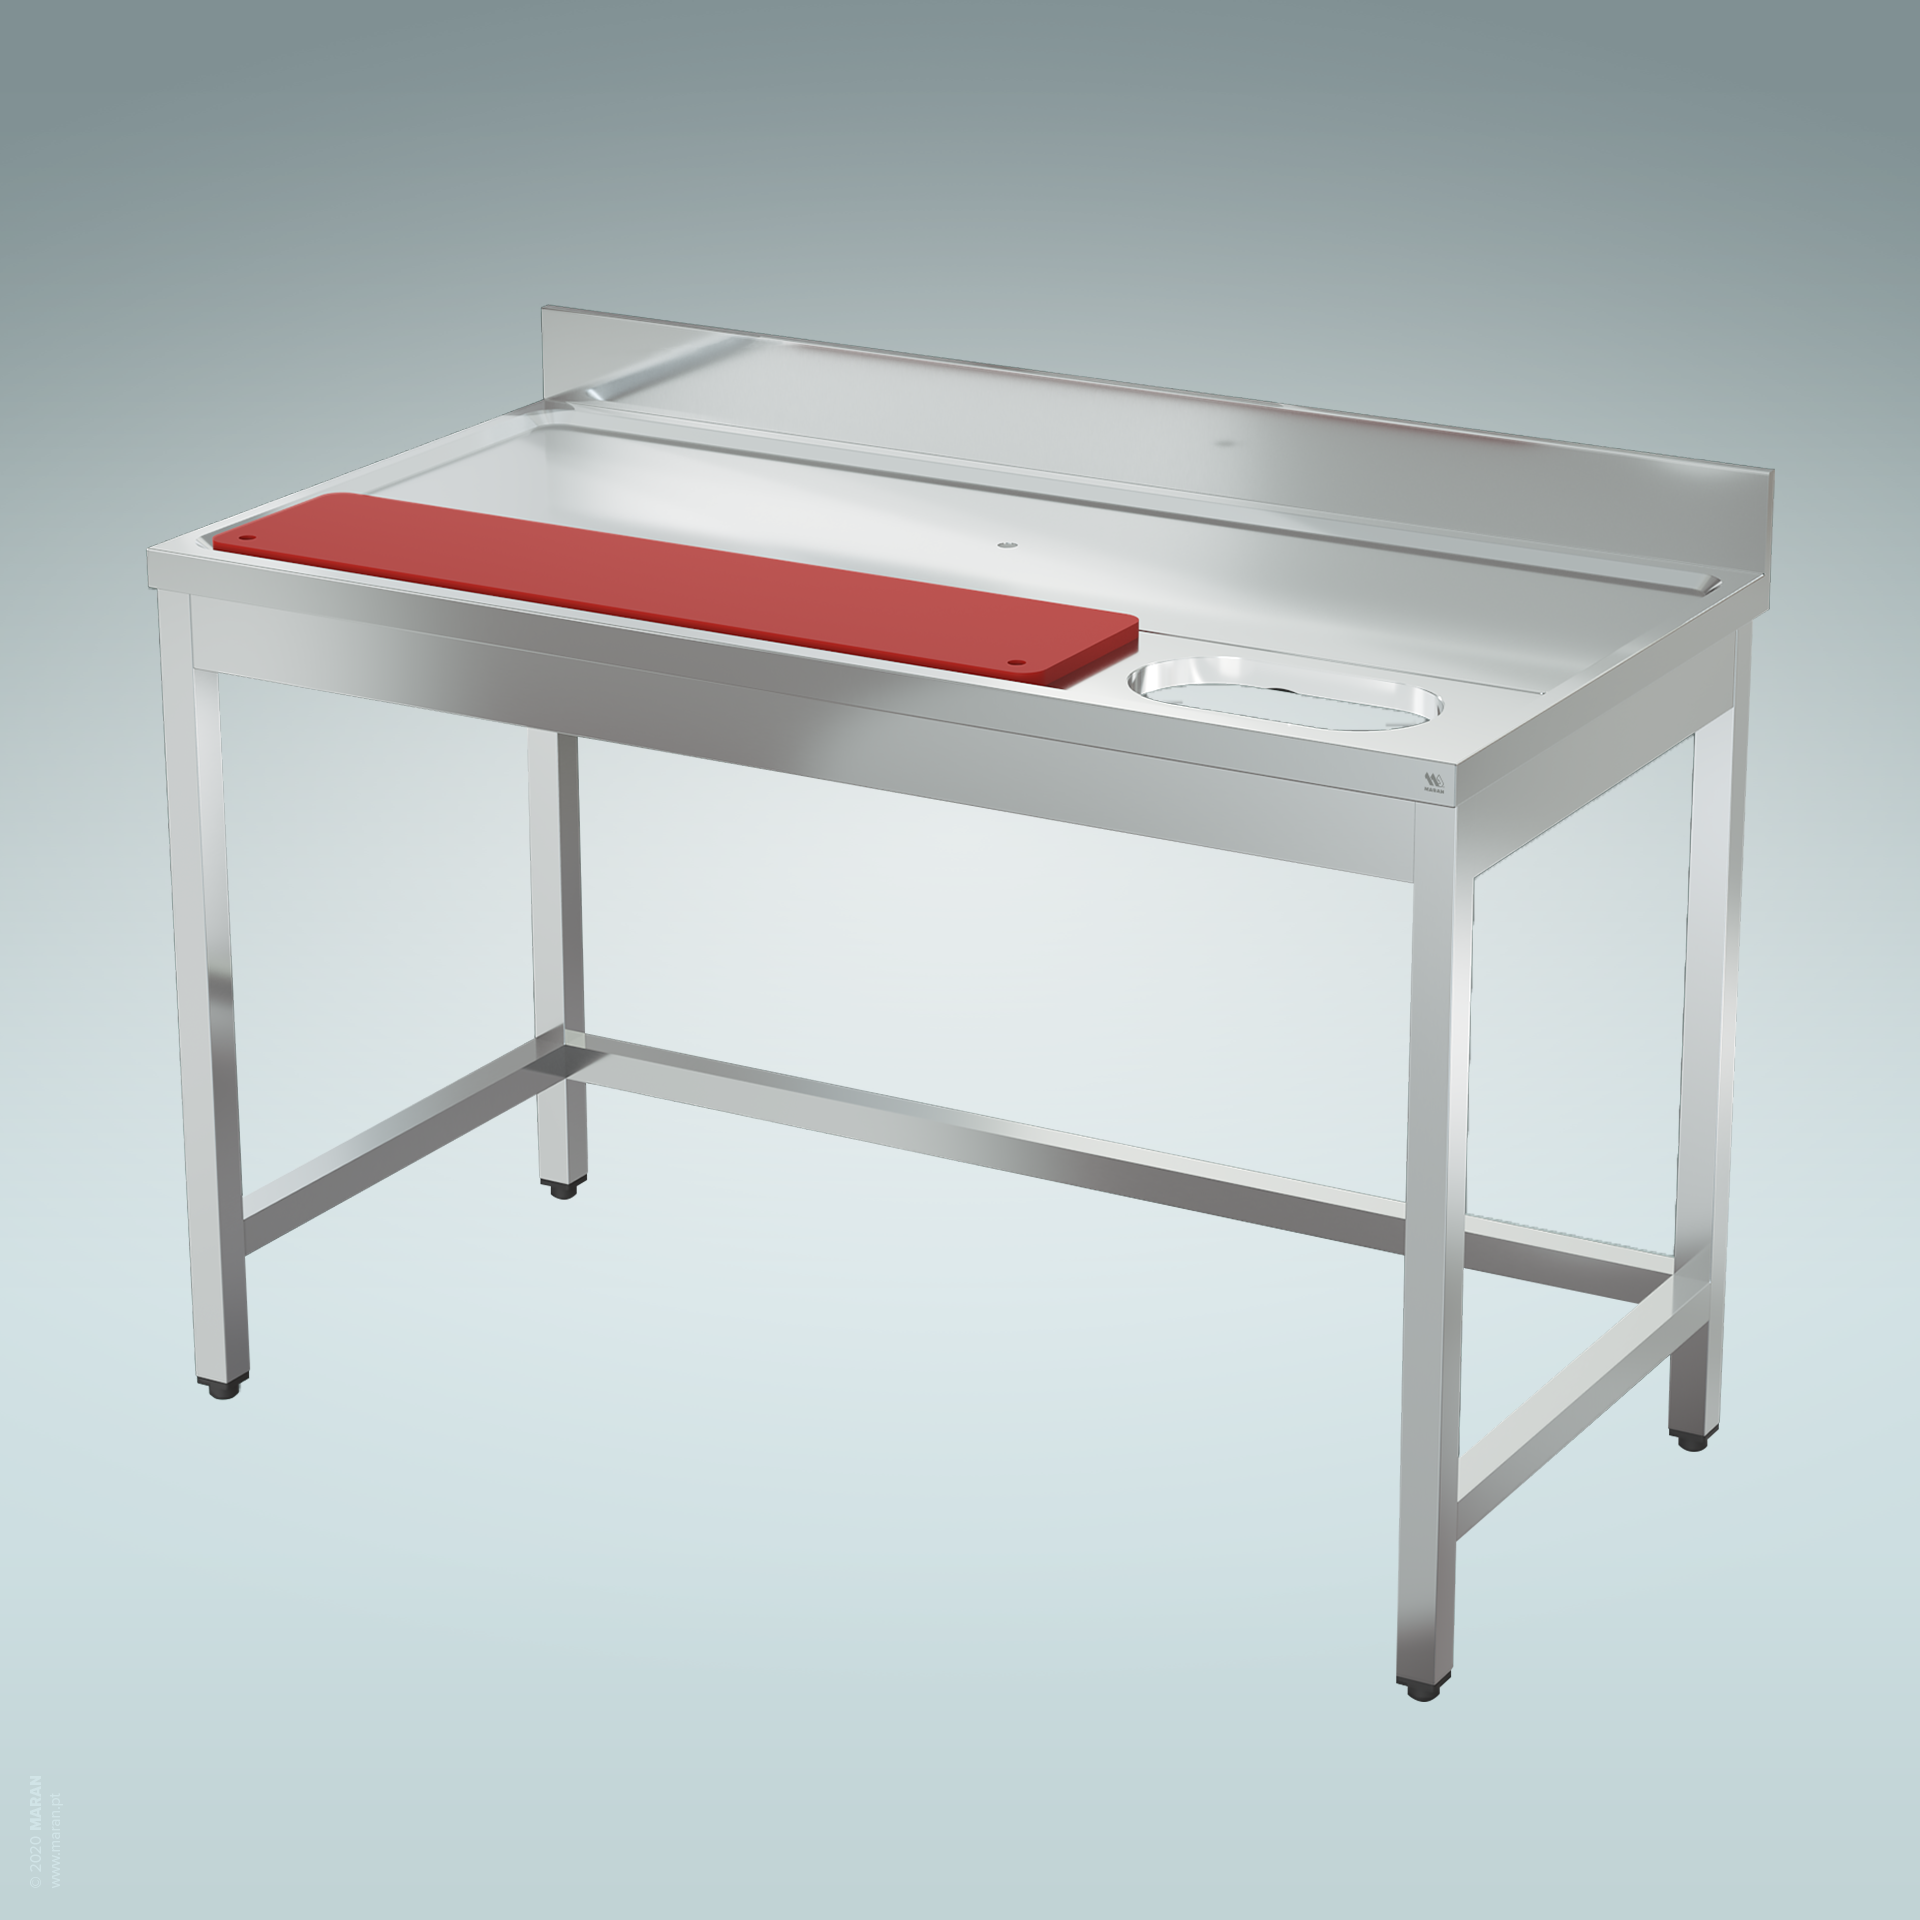 Meat Preparation Table